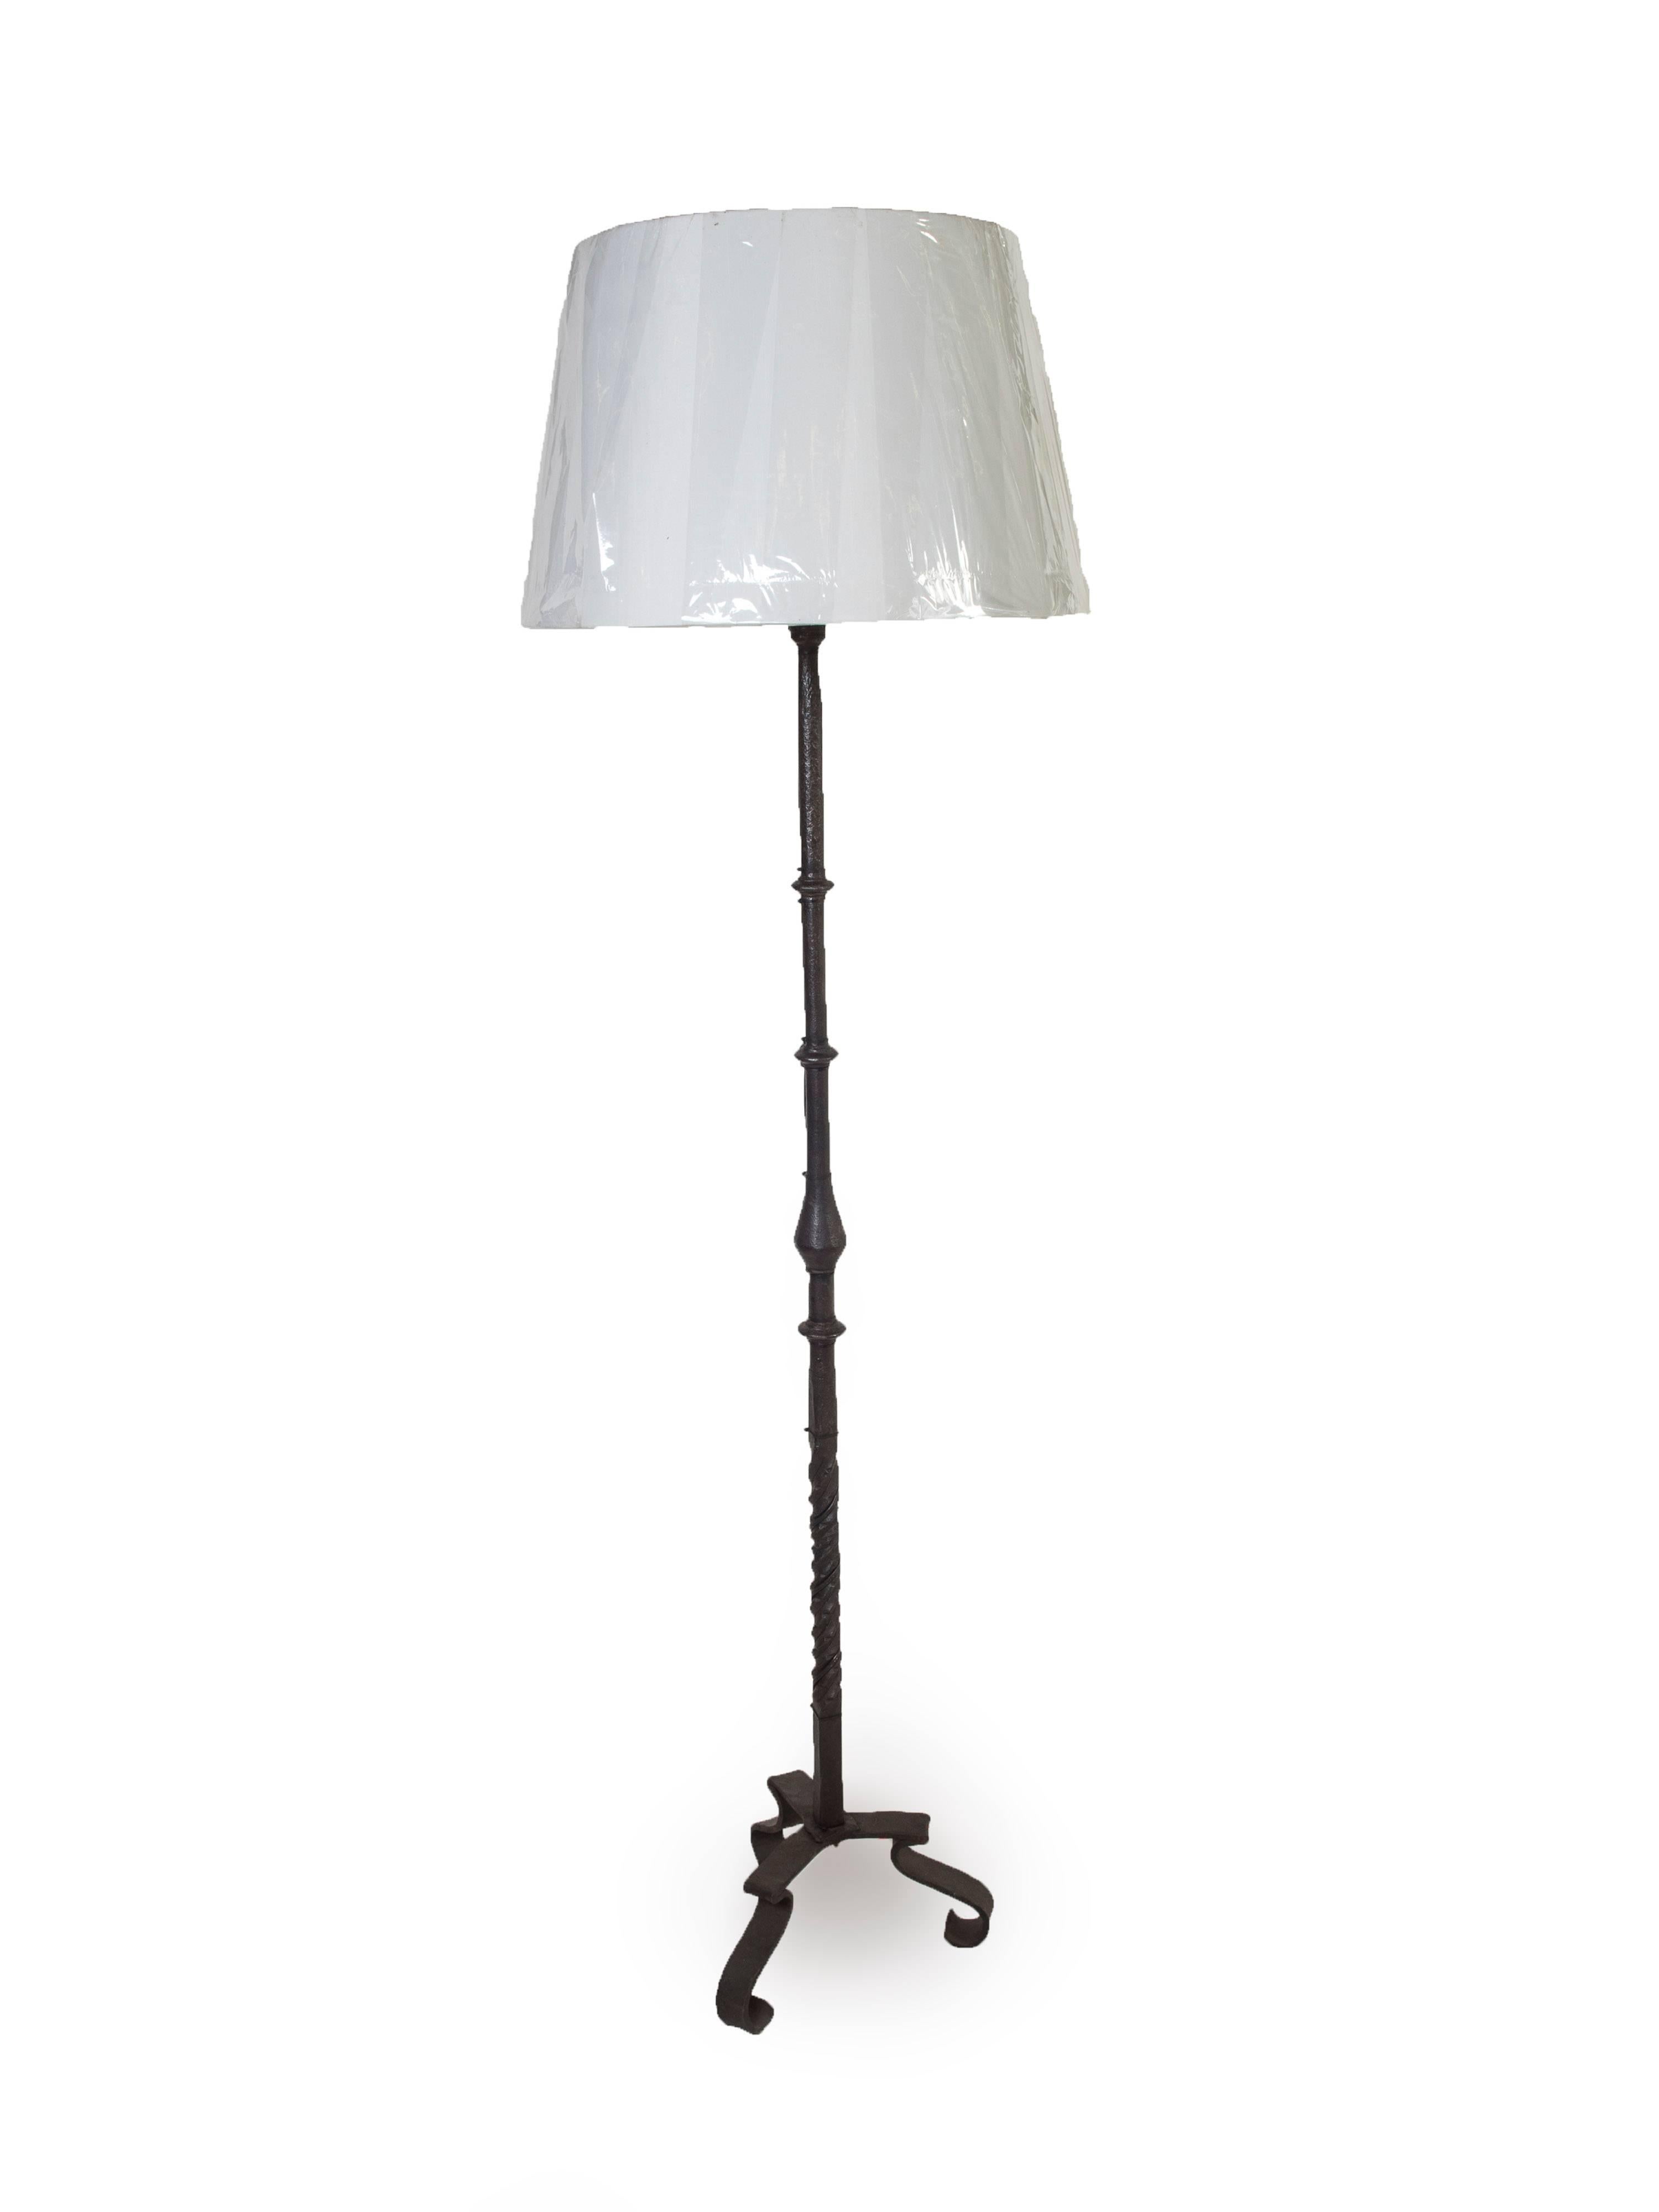 A pair of heavy wrought iron floor lamps. New US UL wiring.
Shades not included, for display purposes only.